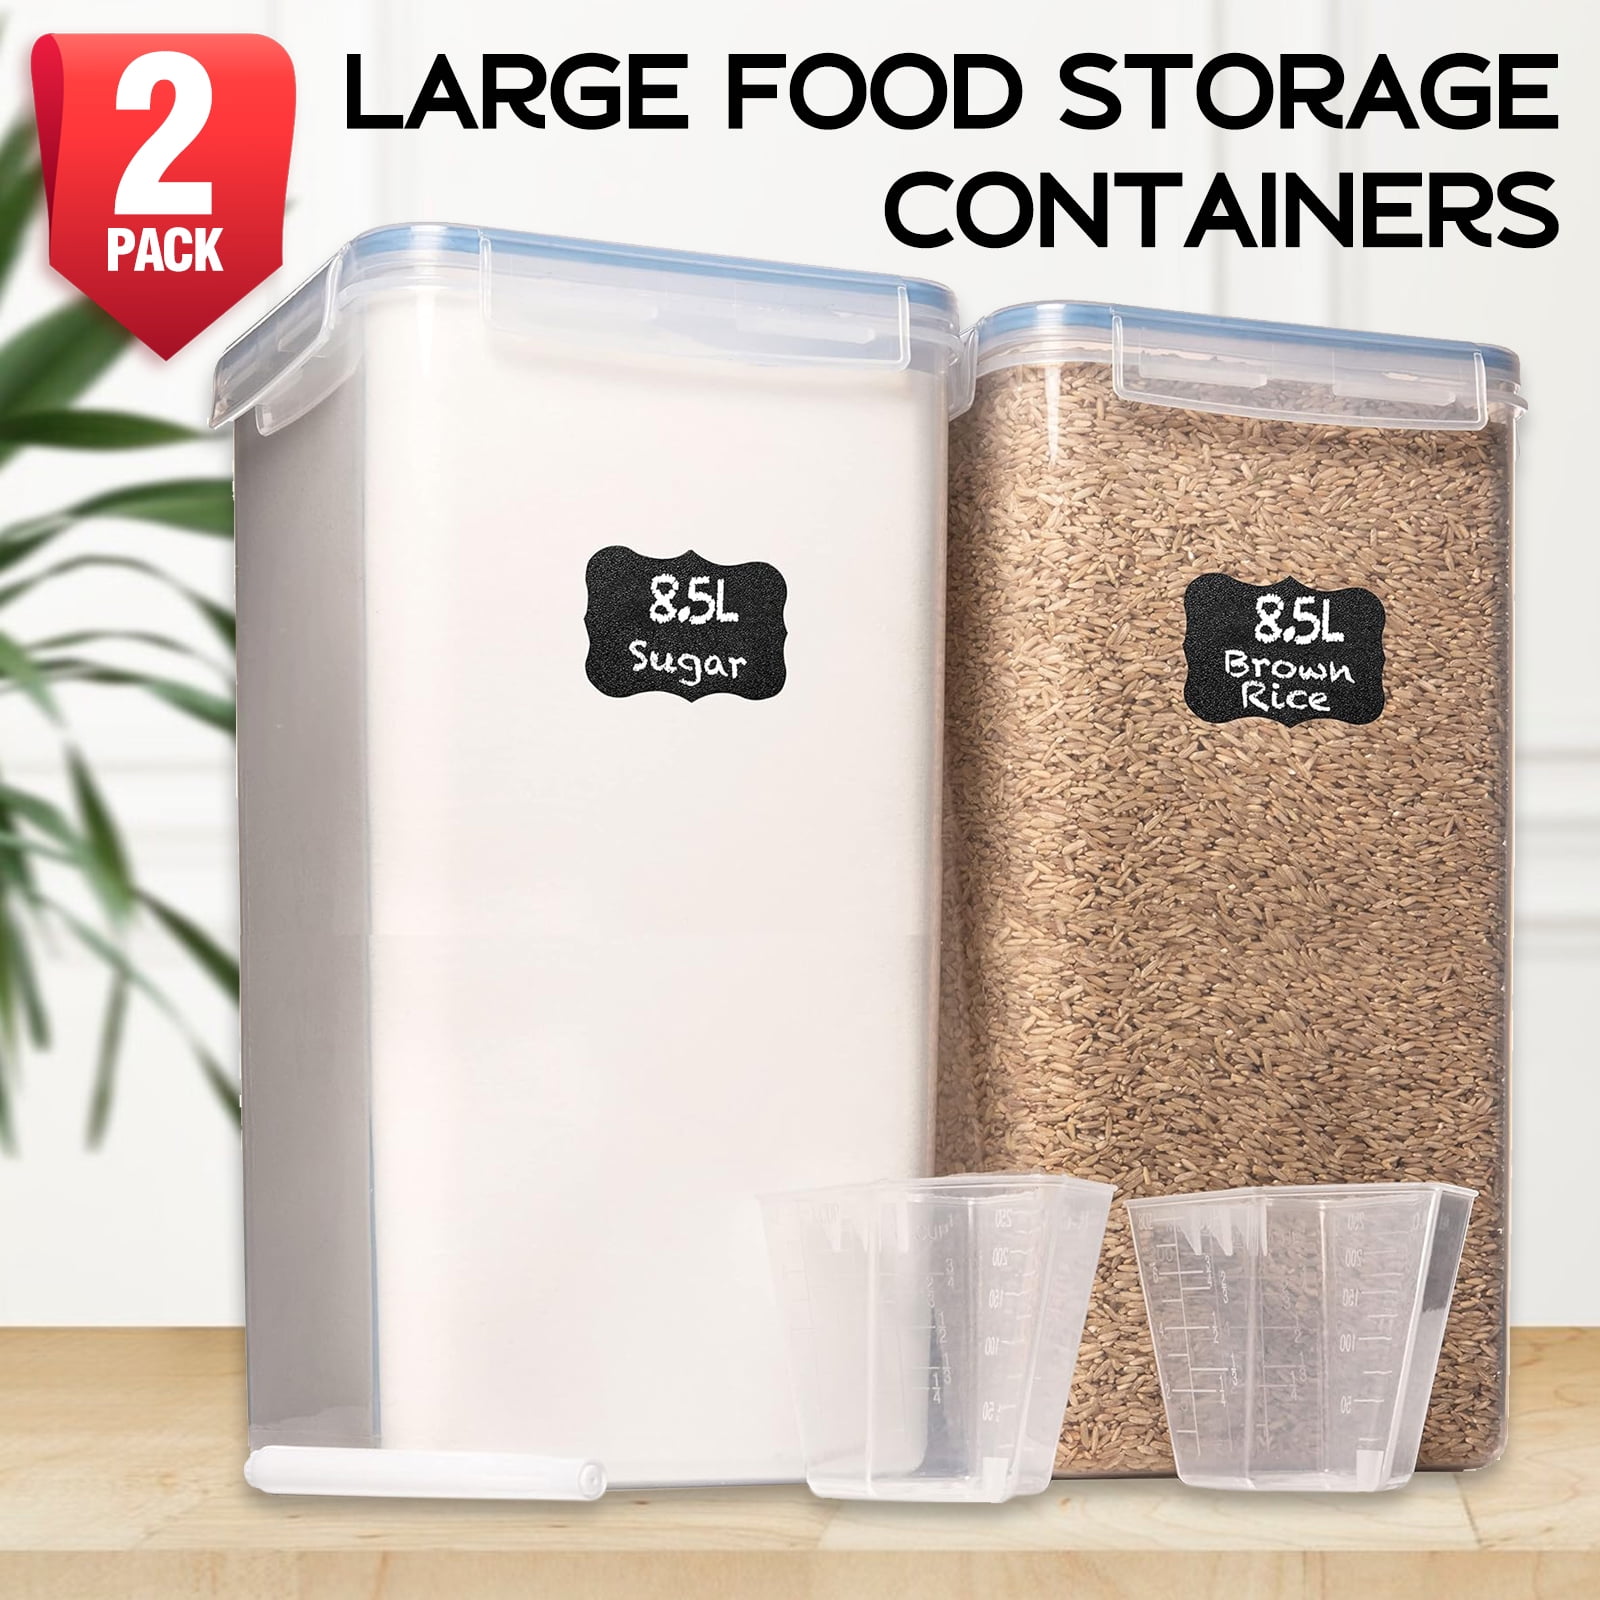 DWËLLZA KITCHEN Extra Large Flour and Sugar Containers - 2 PC Airtight Food  Storage Containers for Pantry Organization and Storage 175 oz - Kitchen